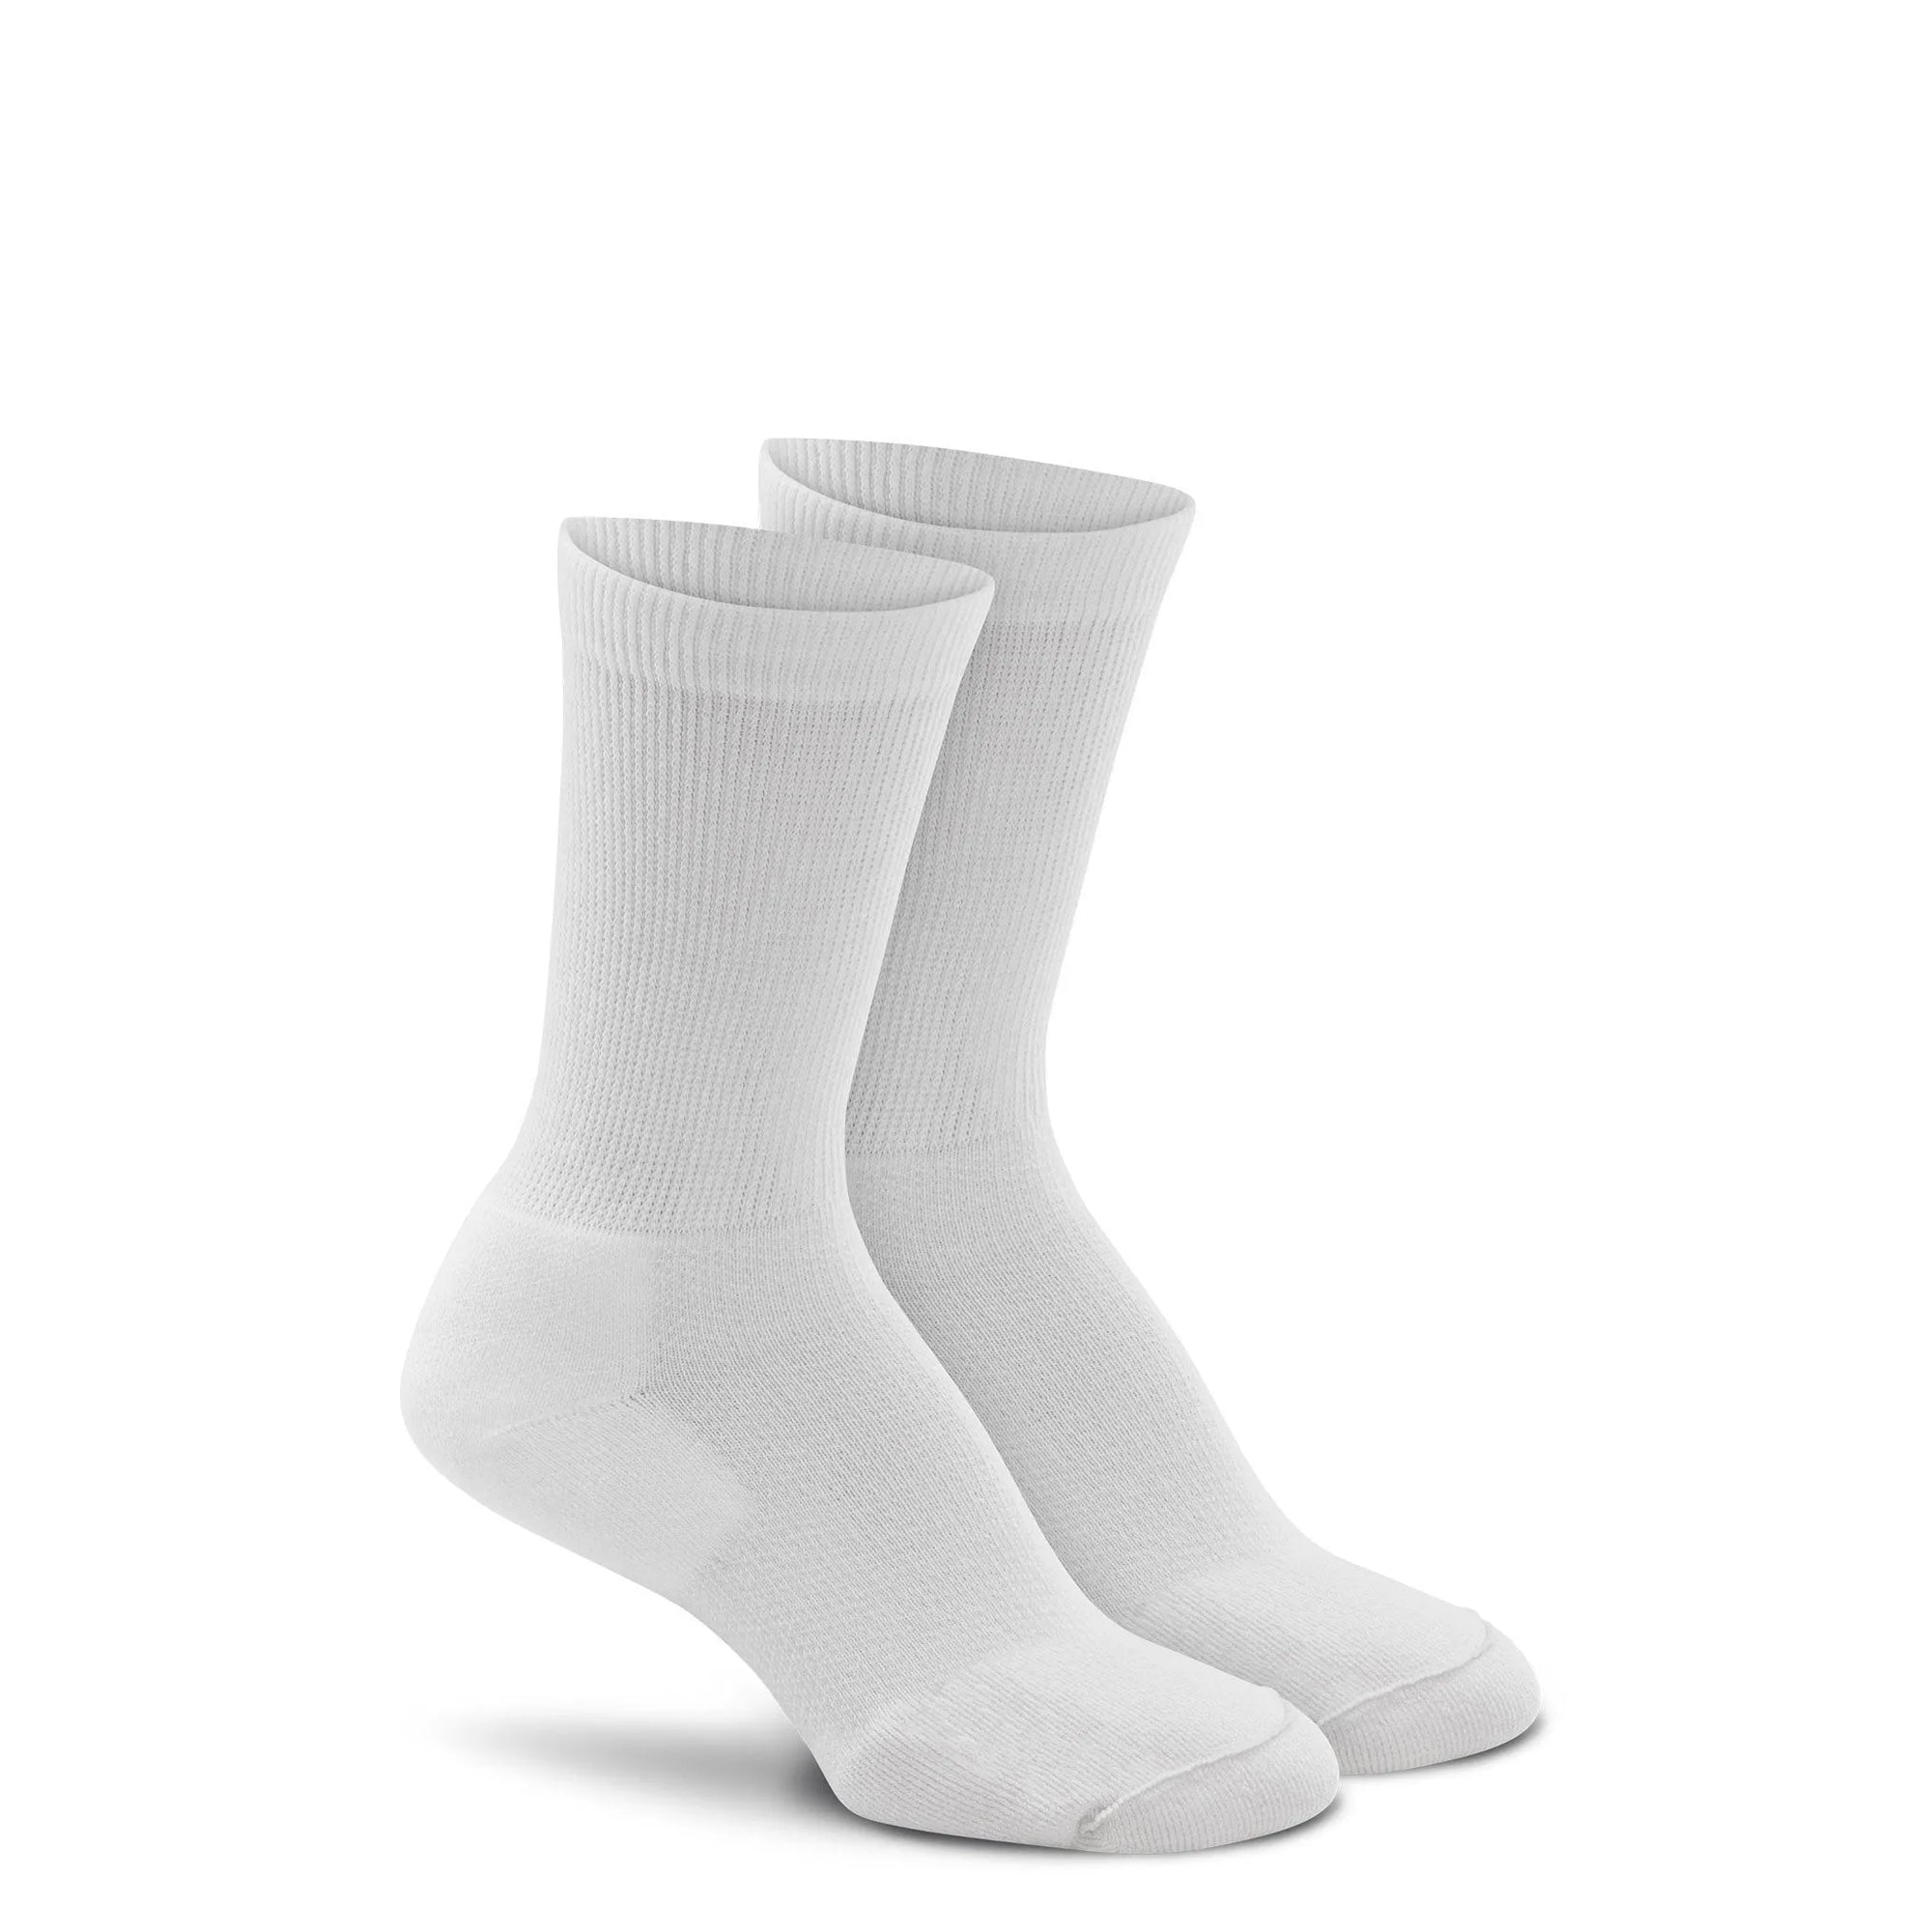 24 Days of Giving: Sock Sale